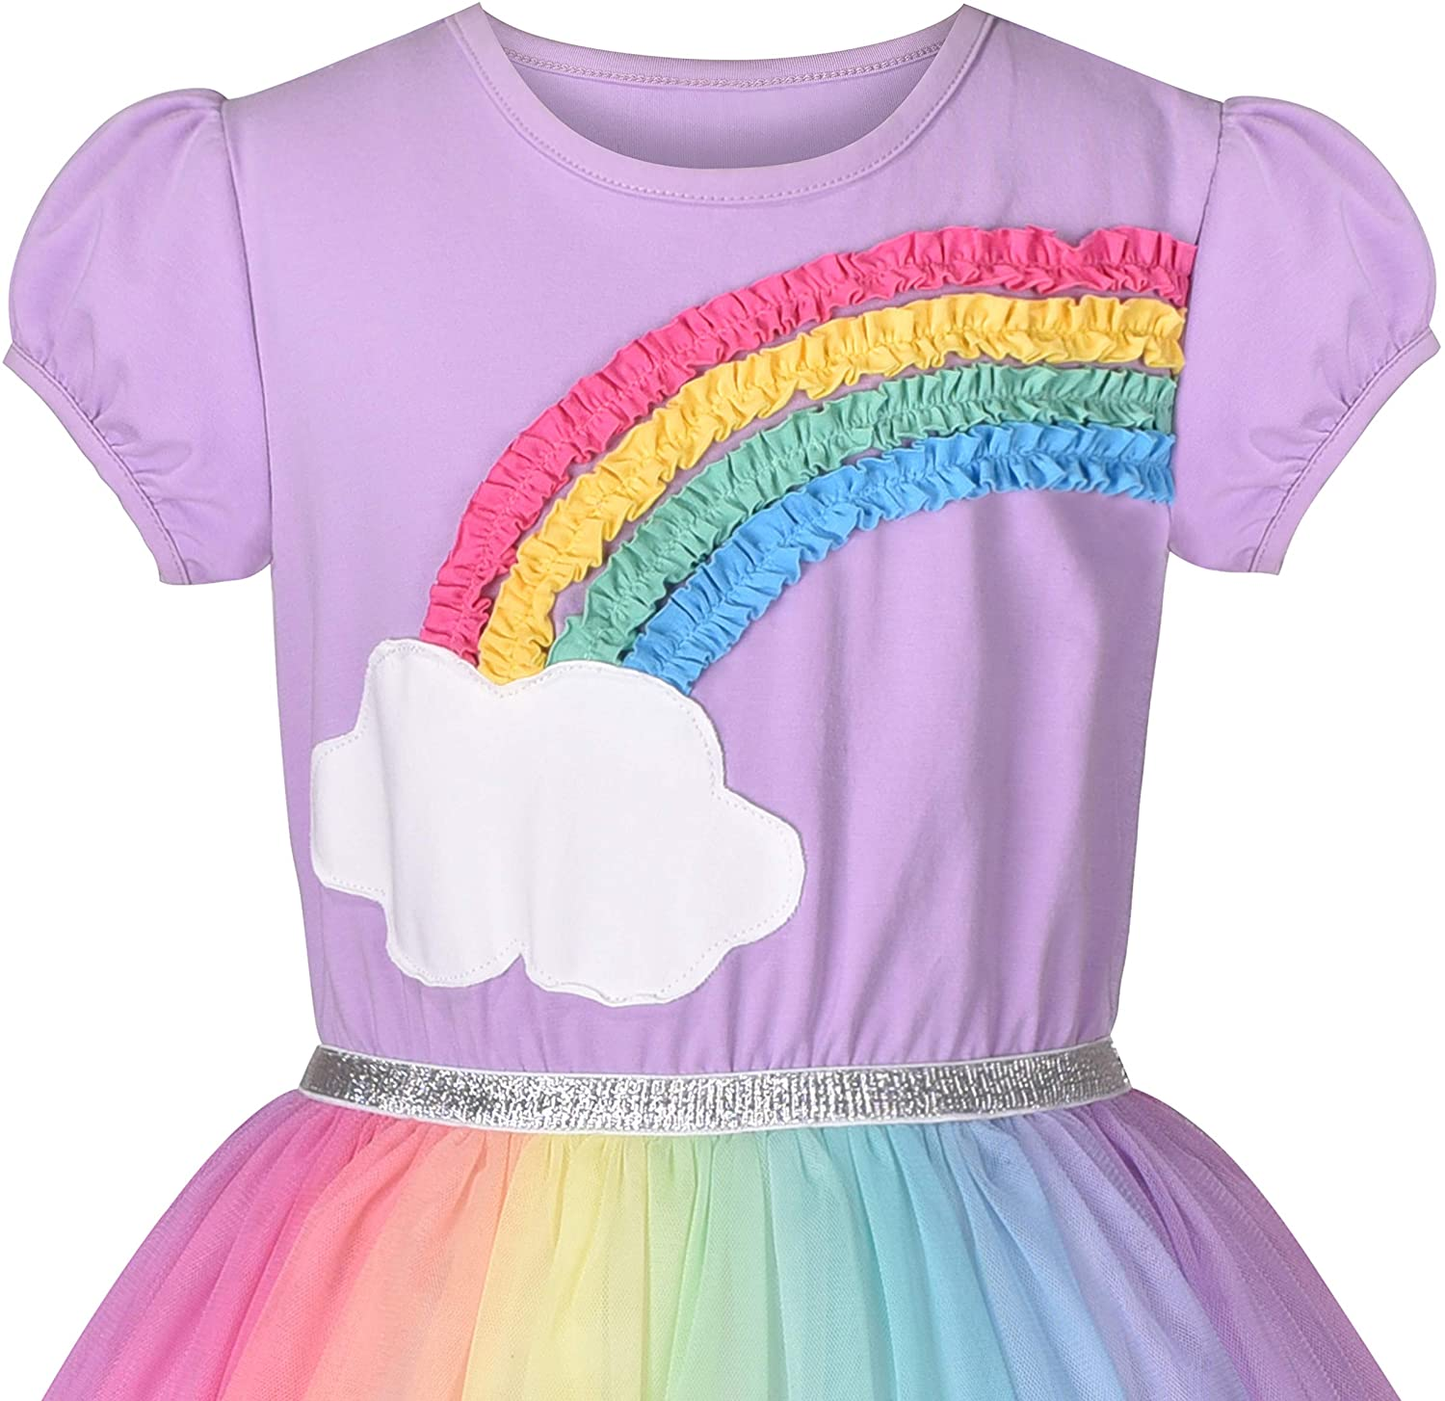 "Purple Short Sleeve Rainbow Tulle Skirt Dress for Girls - Perfect for Birthday Parties"